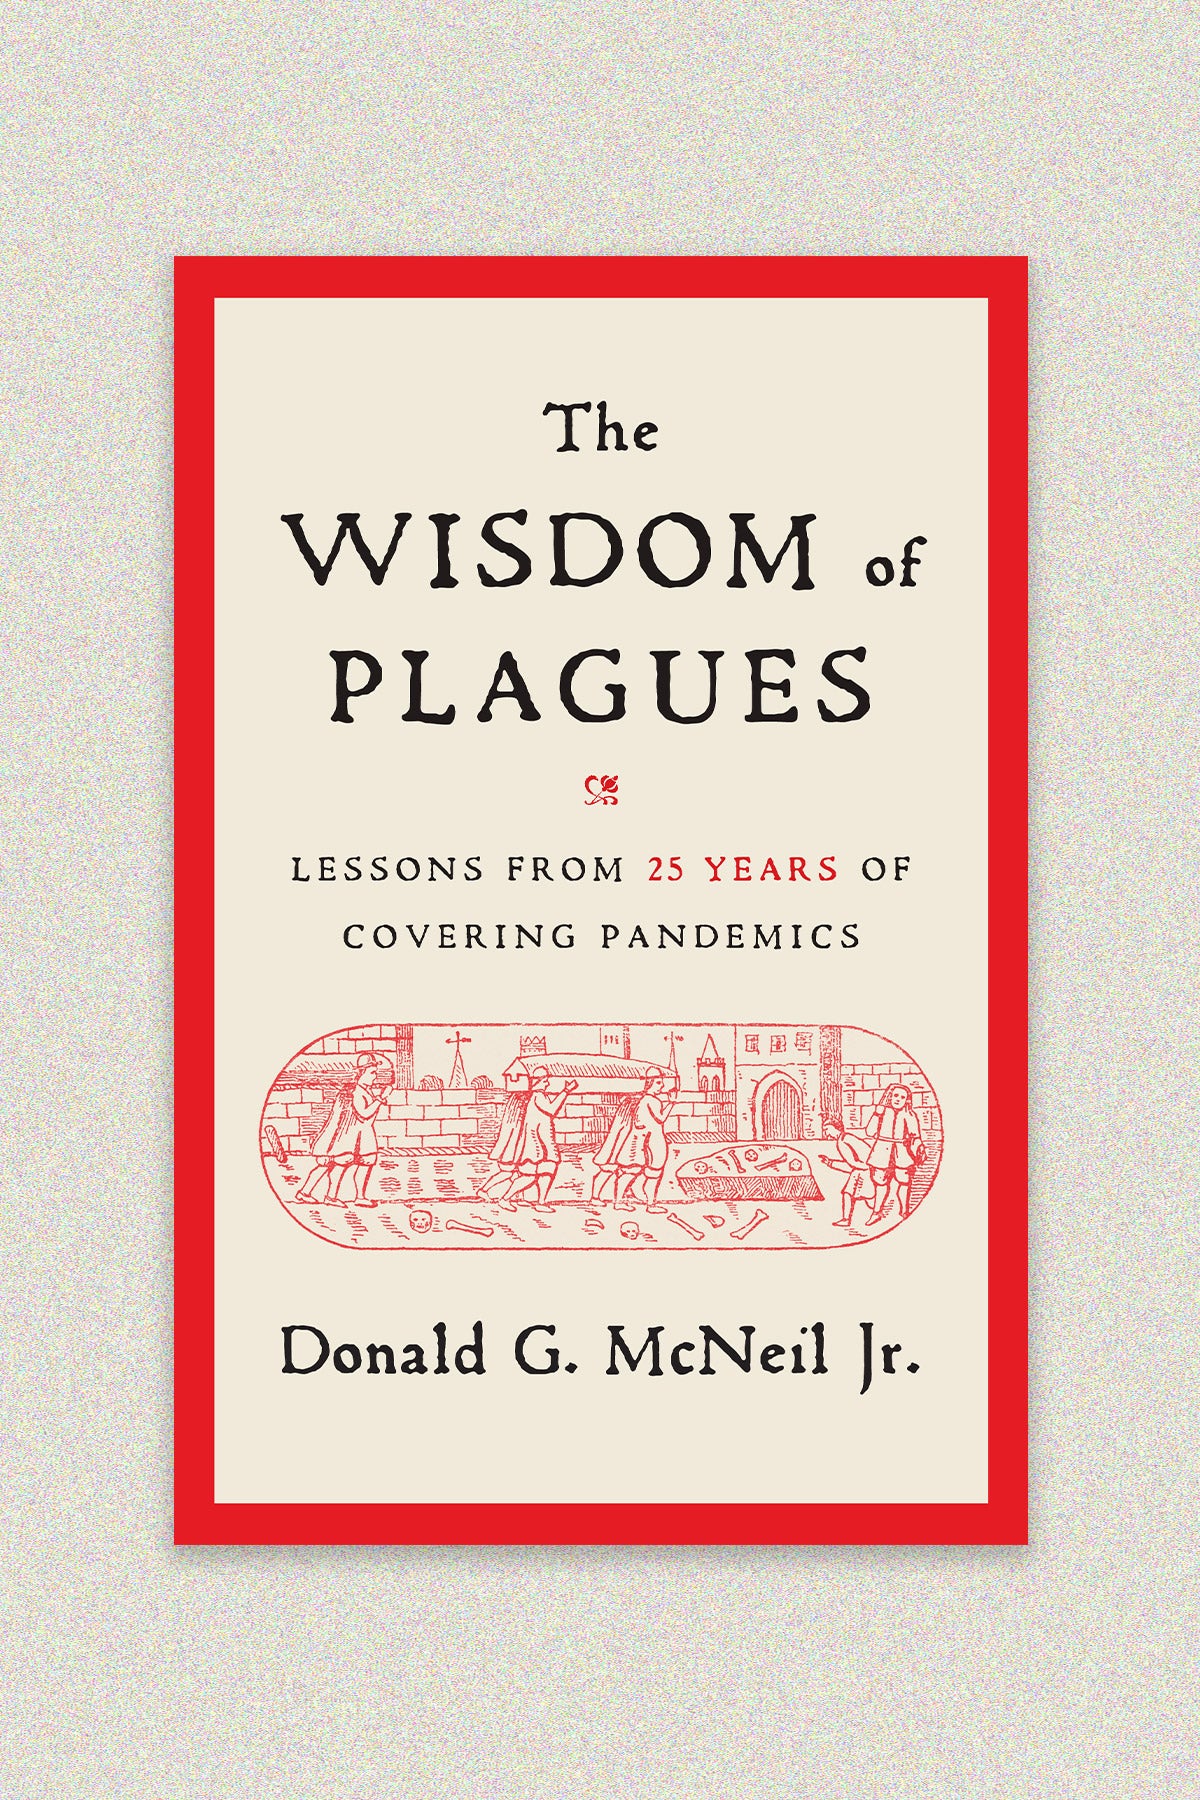 Book cover: “The Wisdom of the Plagues: lessons from 25 years of covering pandemics” by Donald G. McNeil, Jr. The cover is beige with a bright red border. A woodcut illustration of a funeral from the Middle Ages is in a pill-shaped frame in the center.